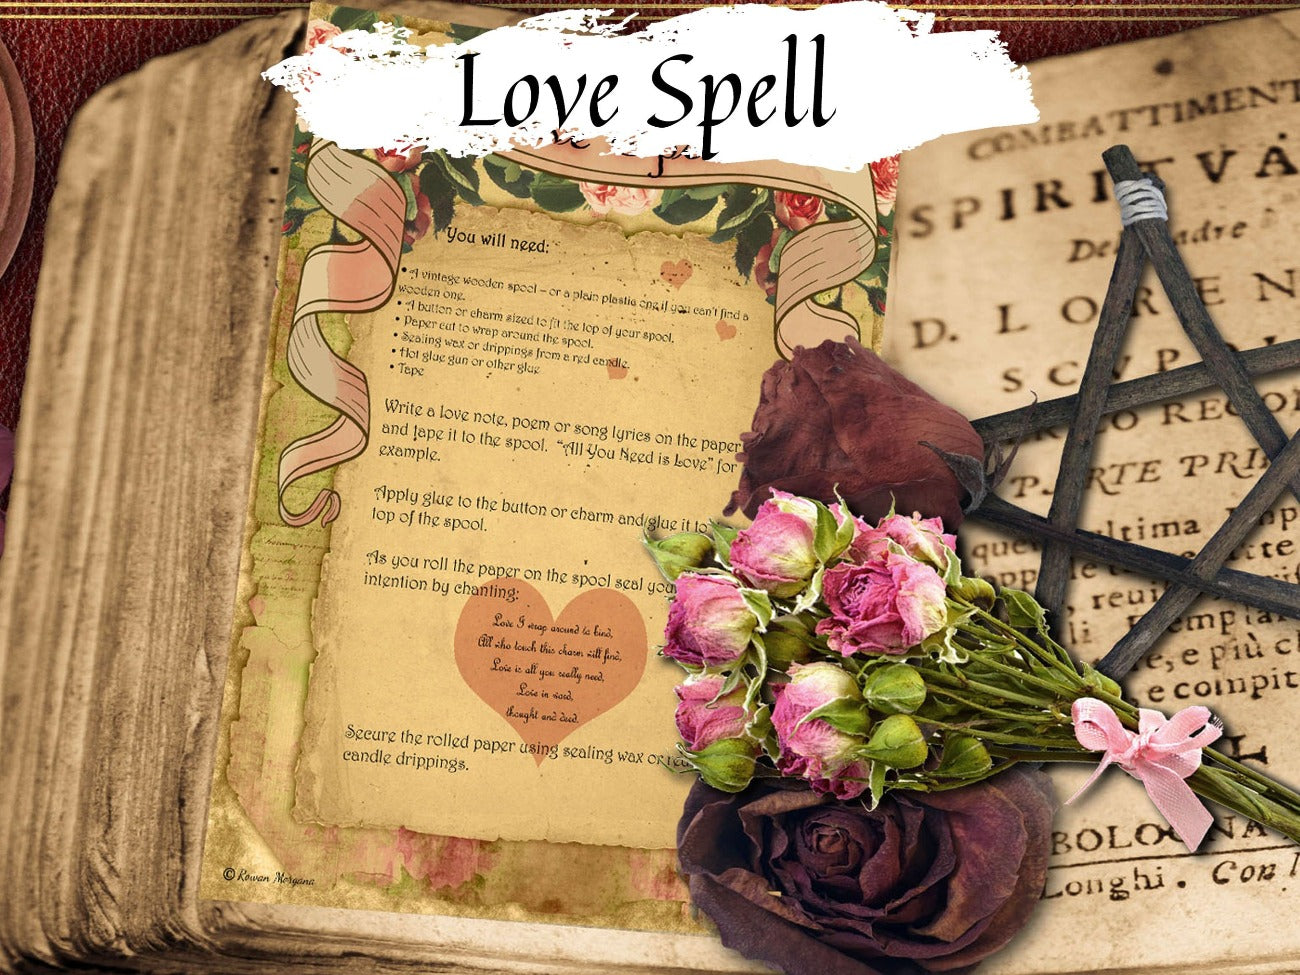 LOVE SPELL, Unique Wicca Witchcraft Spell to Draw a Lover, Witch Love Charm, Love Potion Recipe, Find a Lover and Arouse Love, Valentine - Morgana Magick Spell